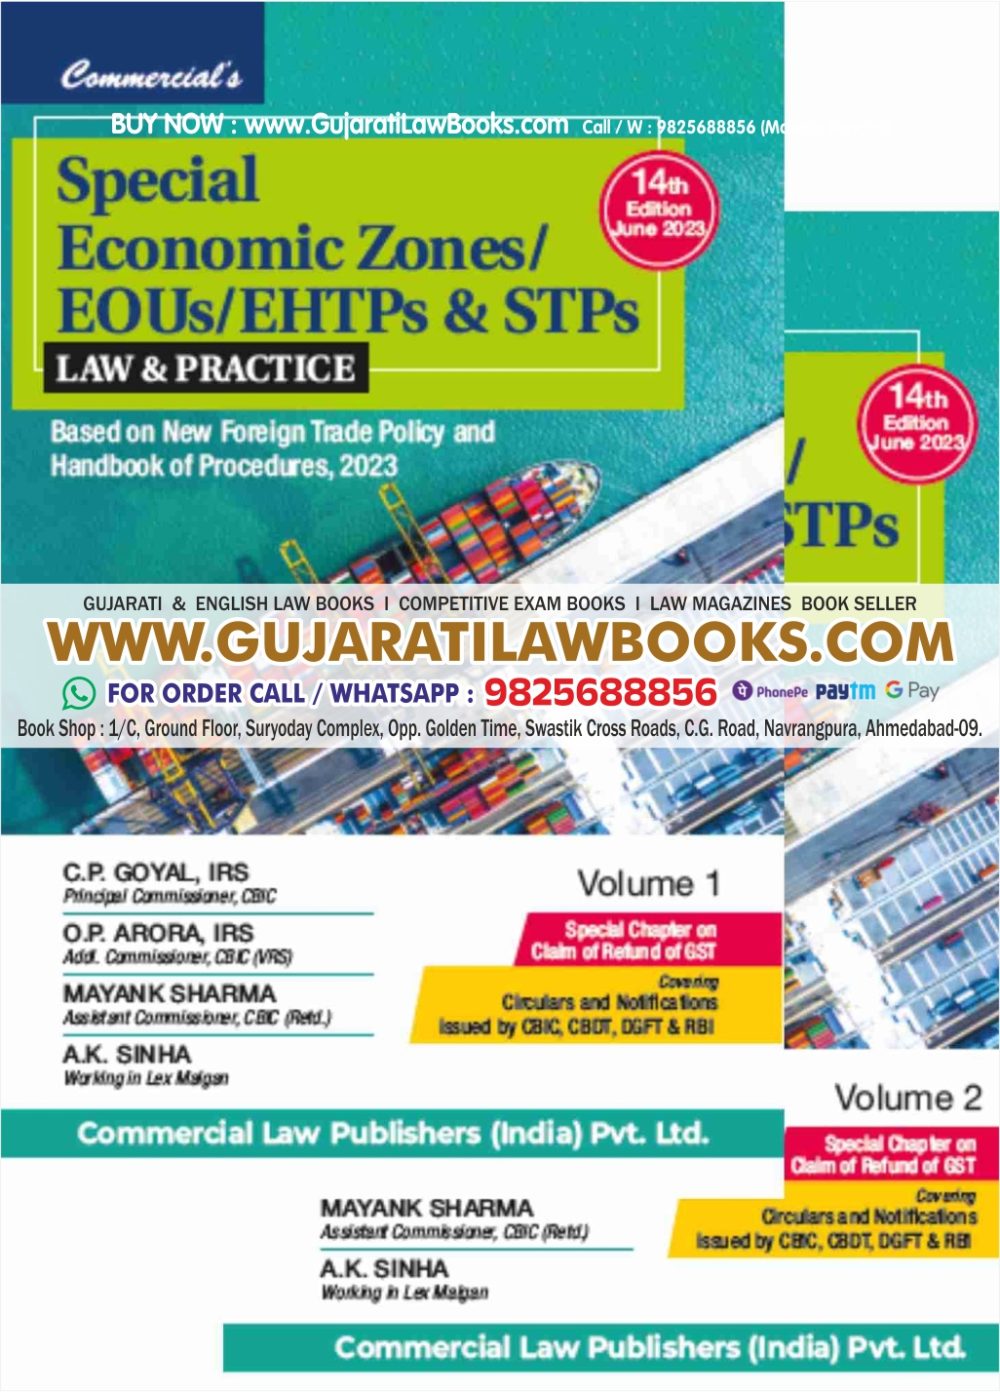 Special Economic Zones / EOUs/EHTPs & STPs - LAW & PRACTICE (in 2 Volume) - Latest 14th Edition June 2023 by Commercial